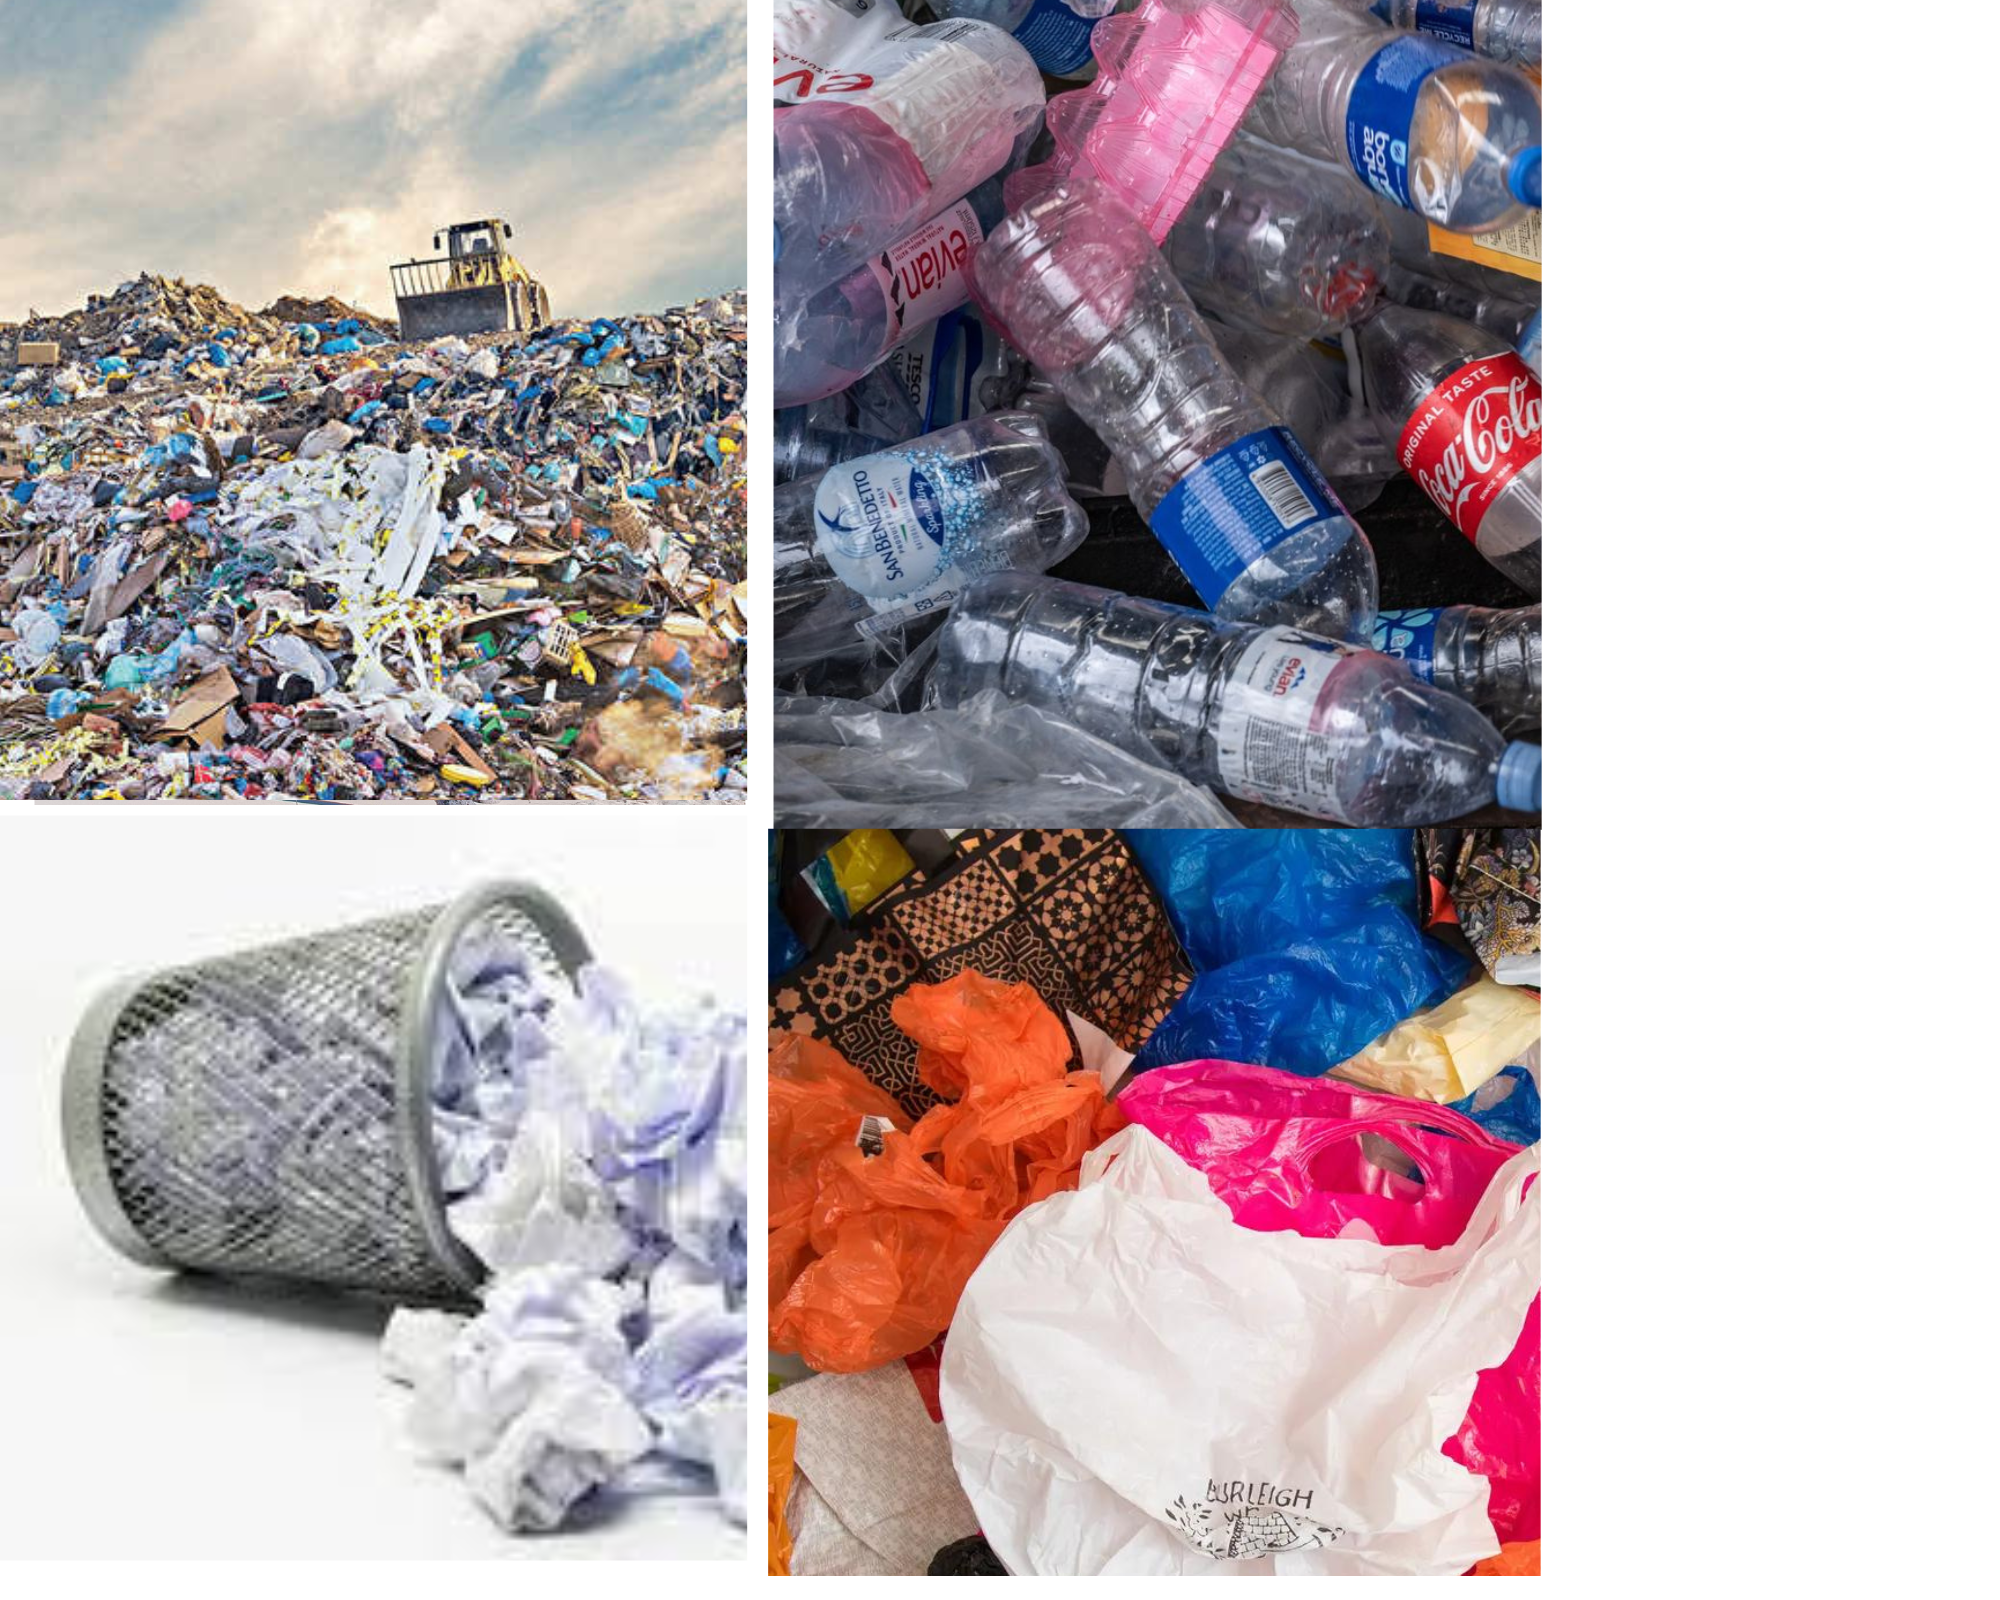 WBBSE Notes For Class 6 General Science And Environment Chapter 12 Waste Products Plastic, old bottles,Papers,Packets